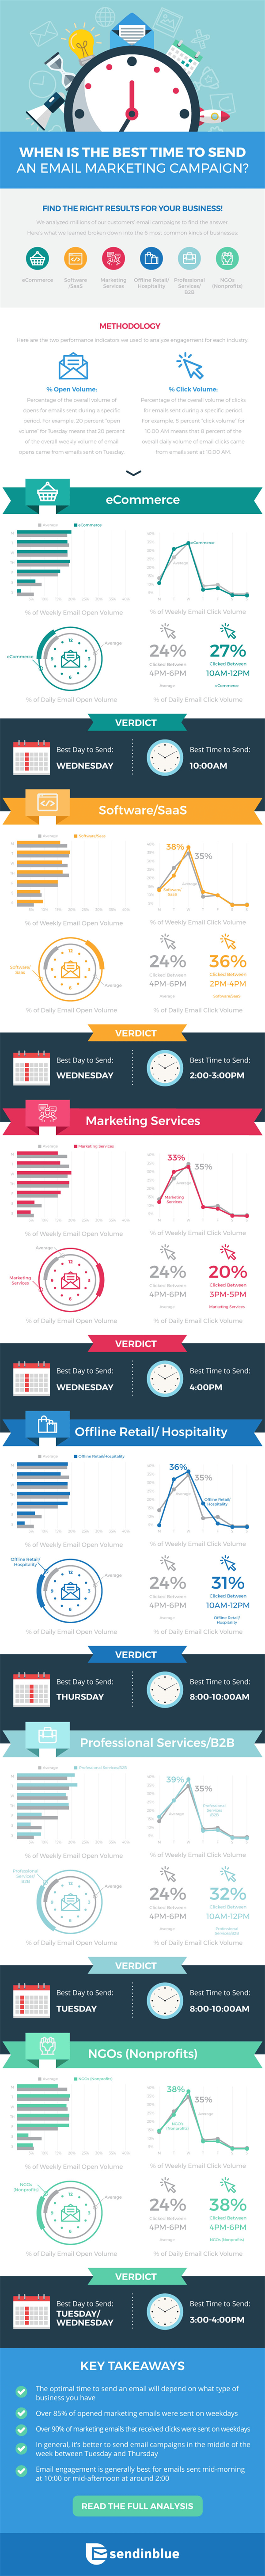 SIB-Best-Day-Time-Email-Infographic